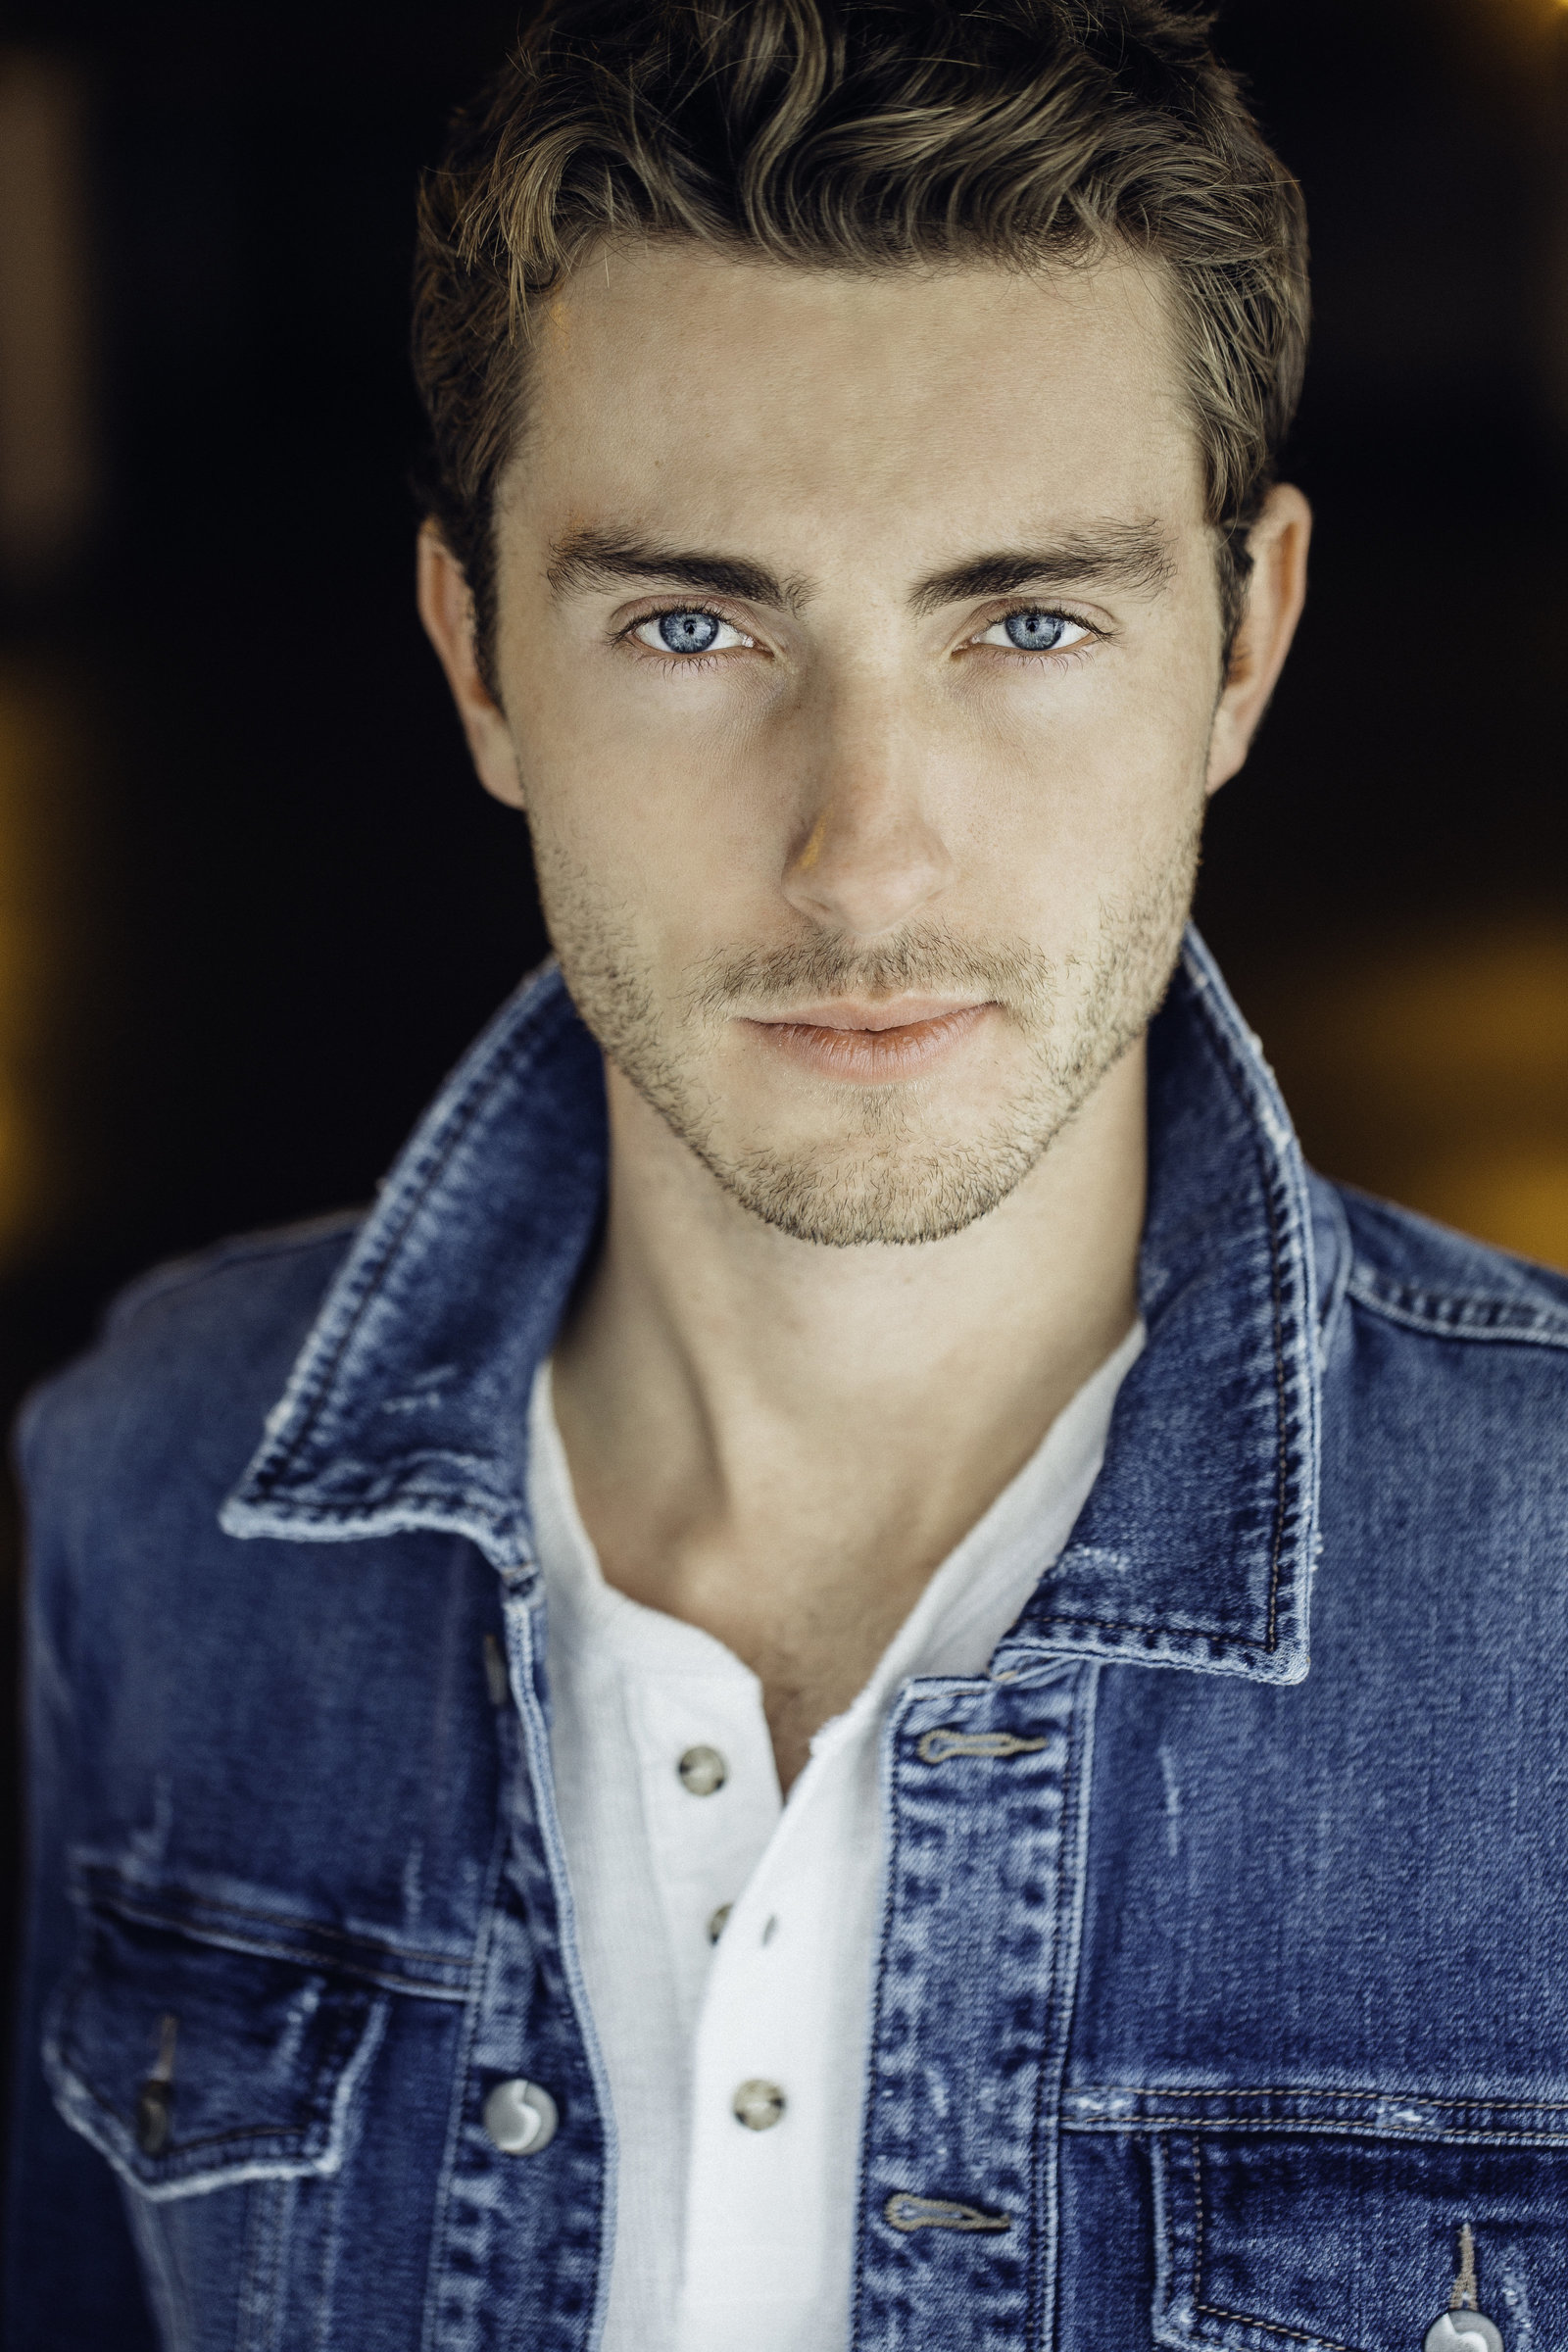 Headshot Photograph Of Young Man In Blue Denim Jacket And White Buttoned Shirt Los Angeles